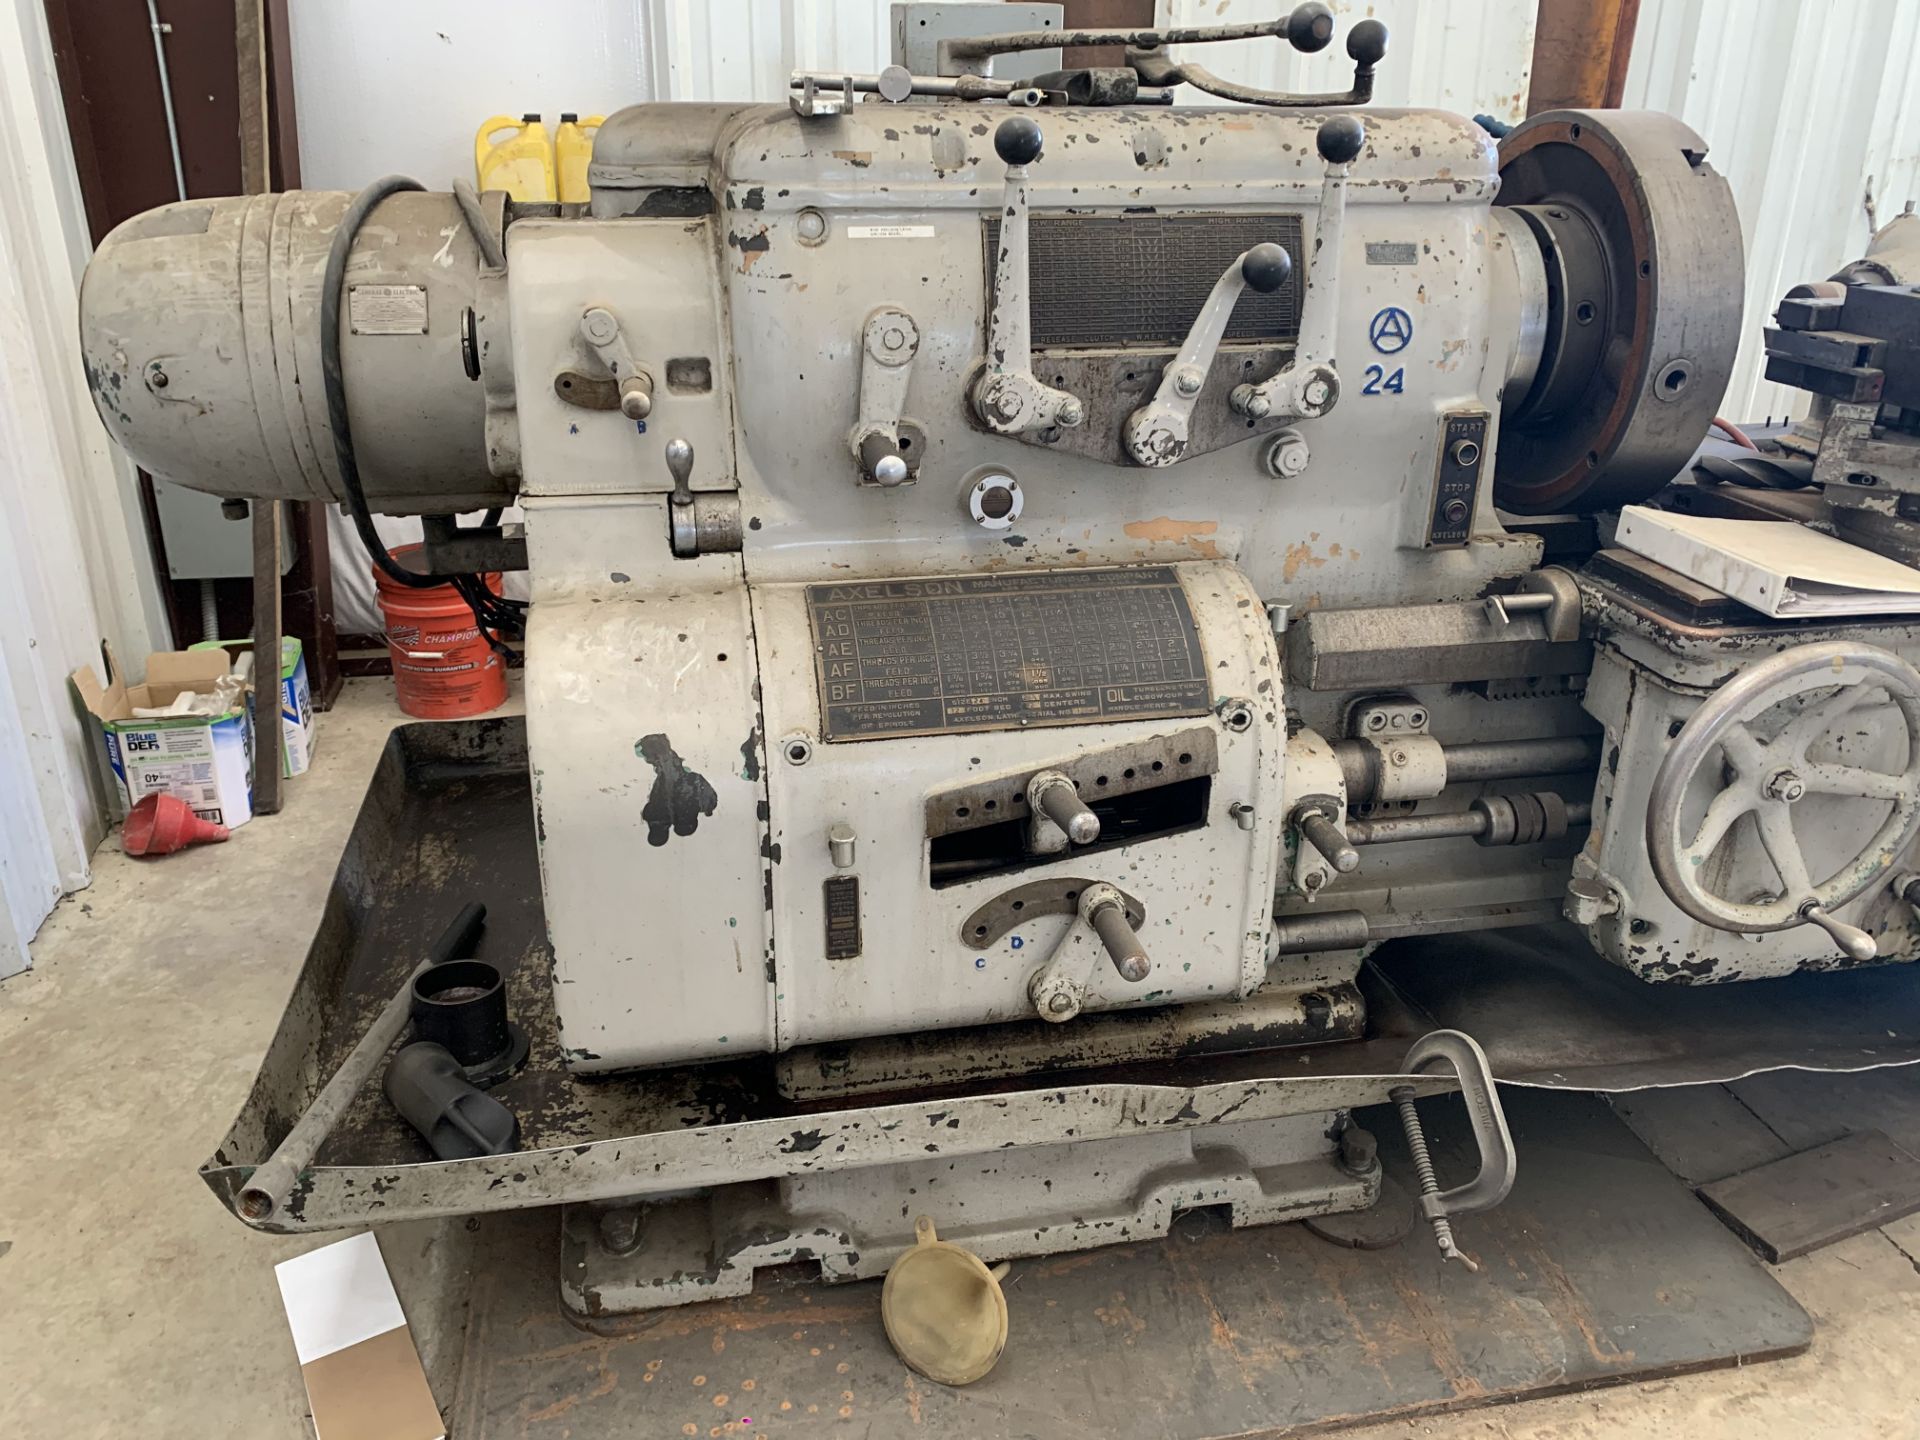 Axelson A24 Lathe, 24” x 72” Capacity (MUST BE REMOVED BY NOVEMBER 16, 2022) - Image 5 of 6